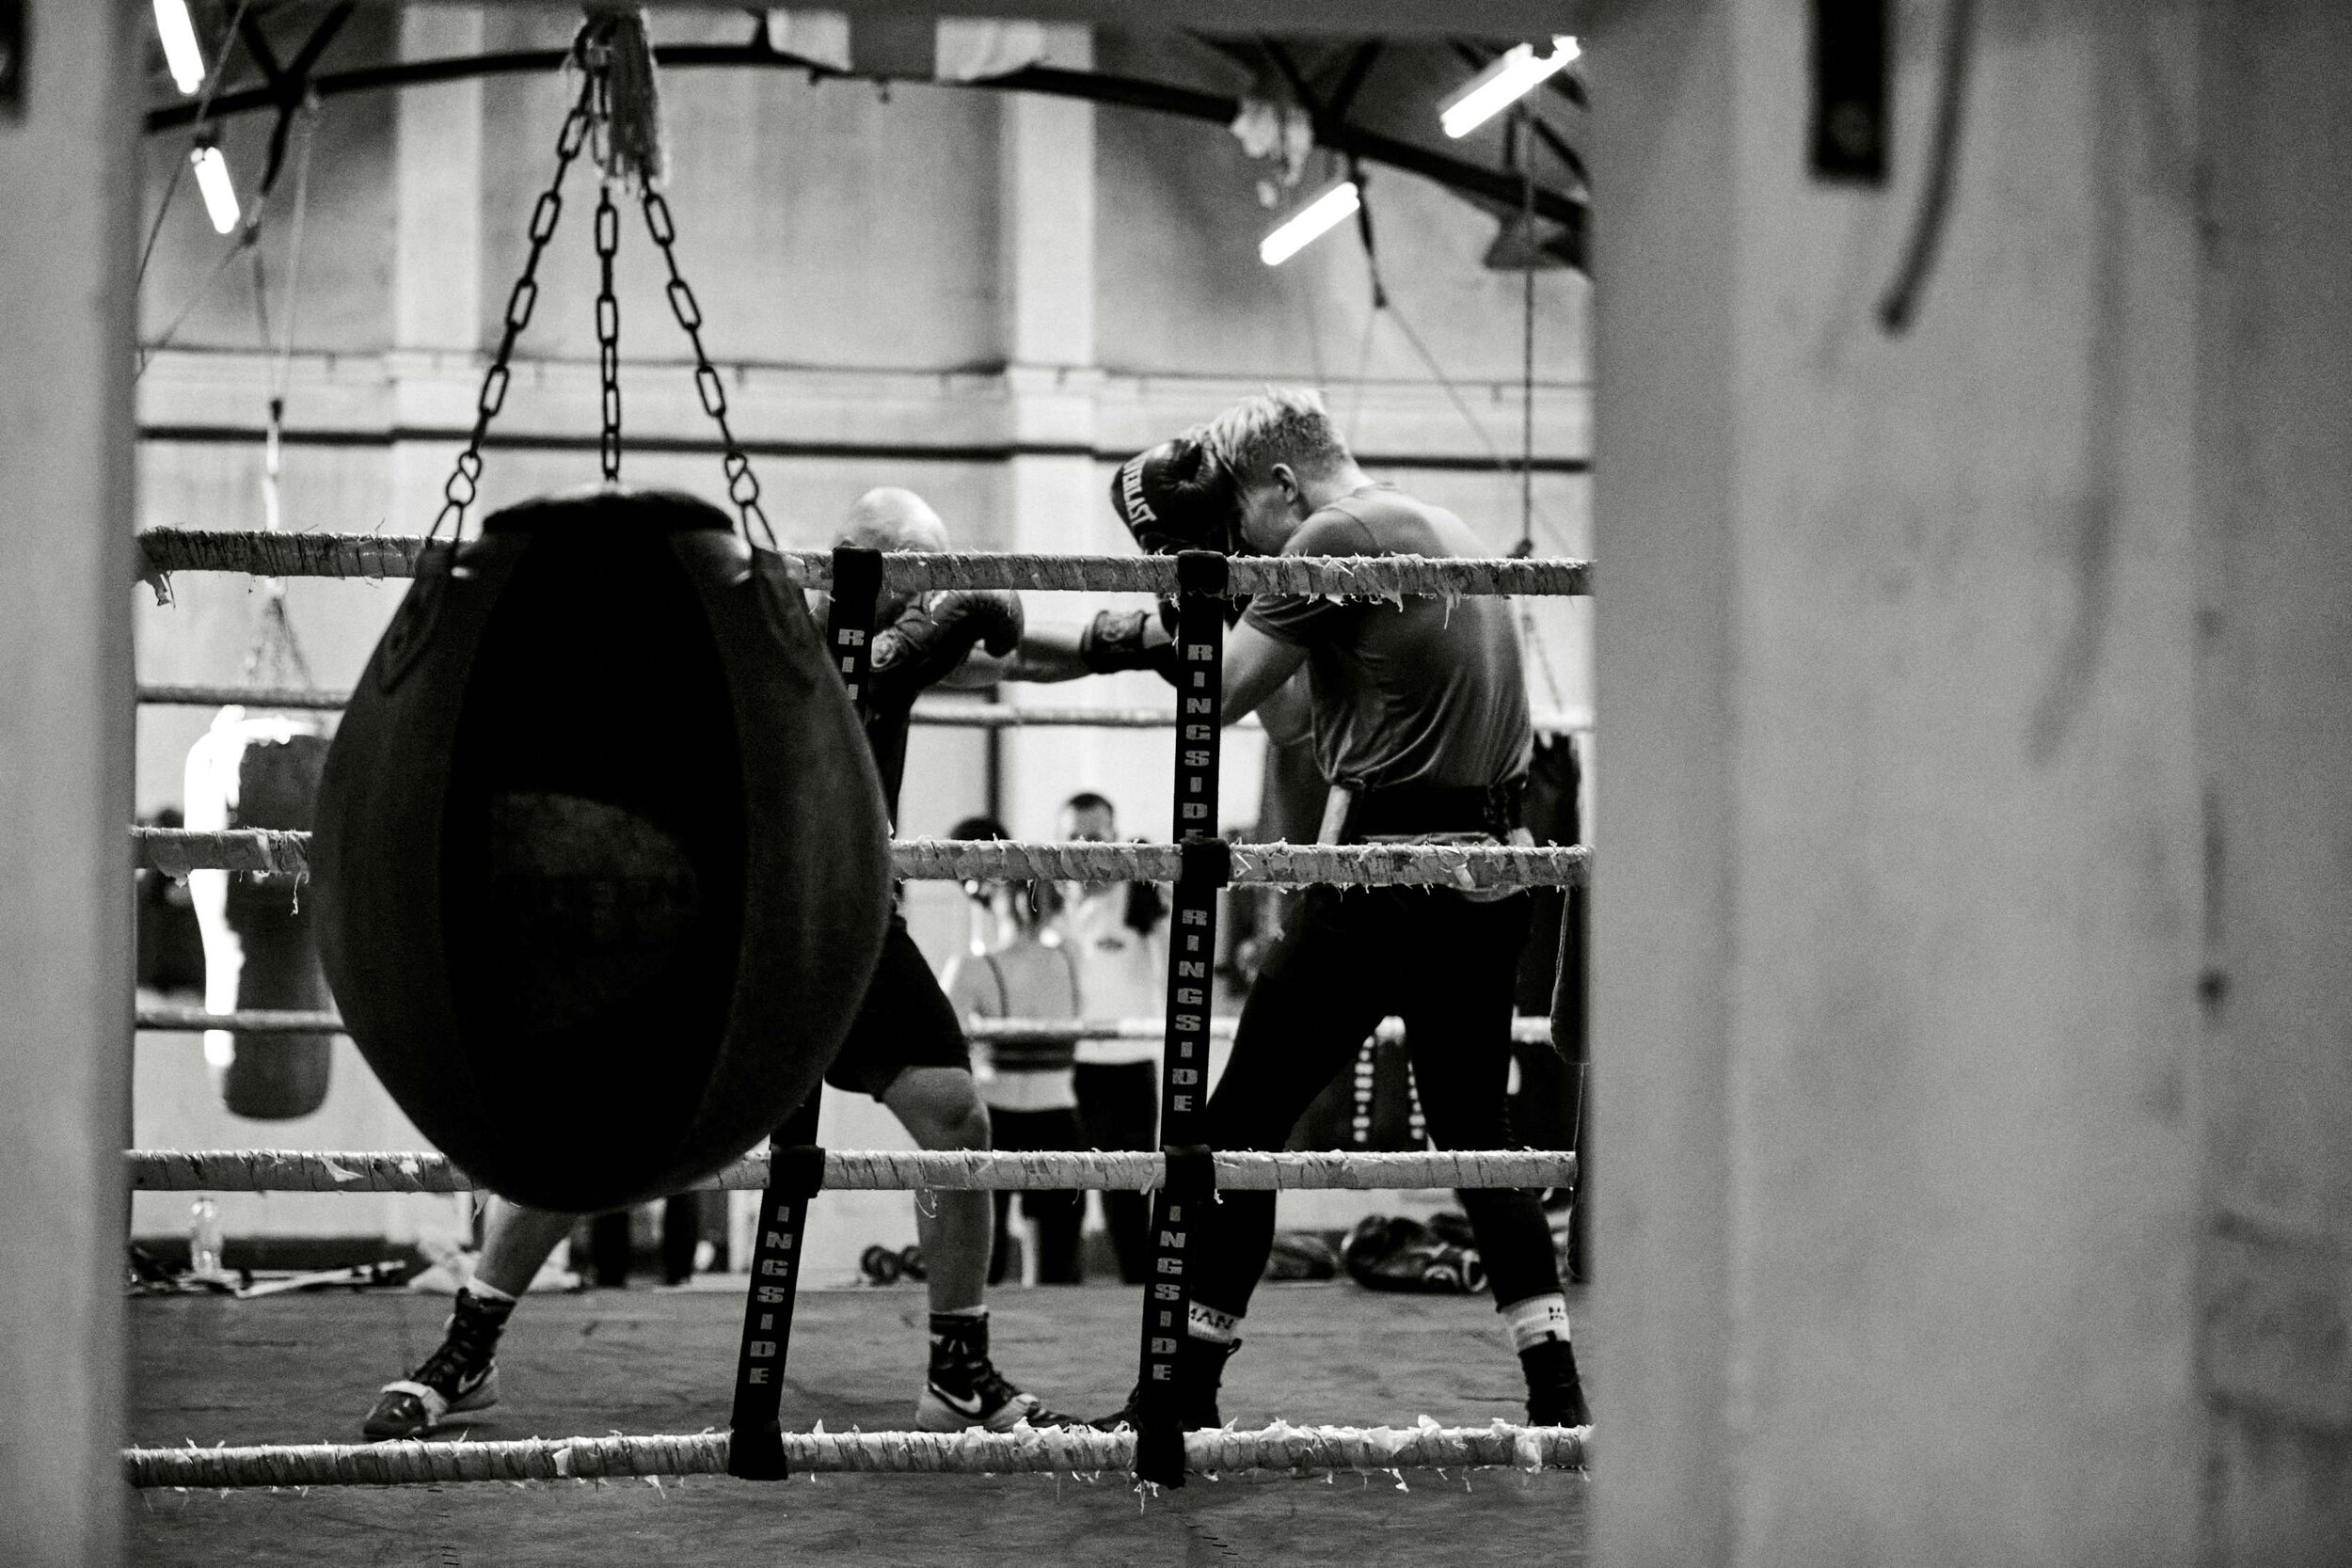 Guernsey Boxing Club